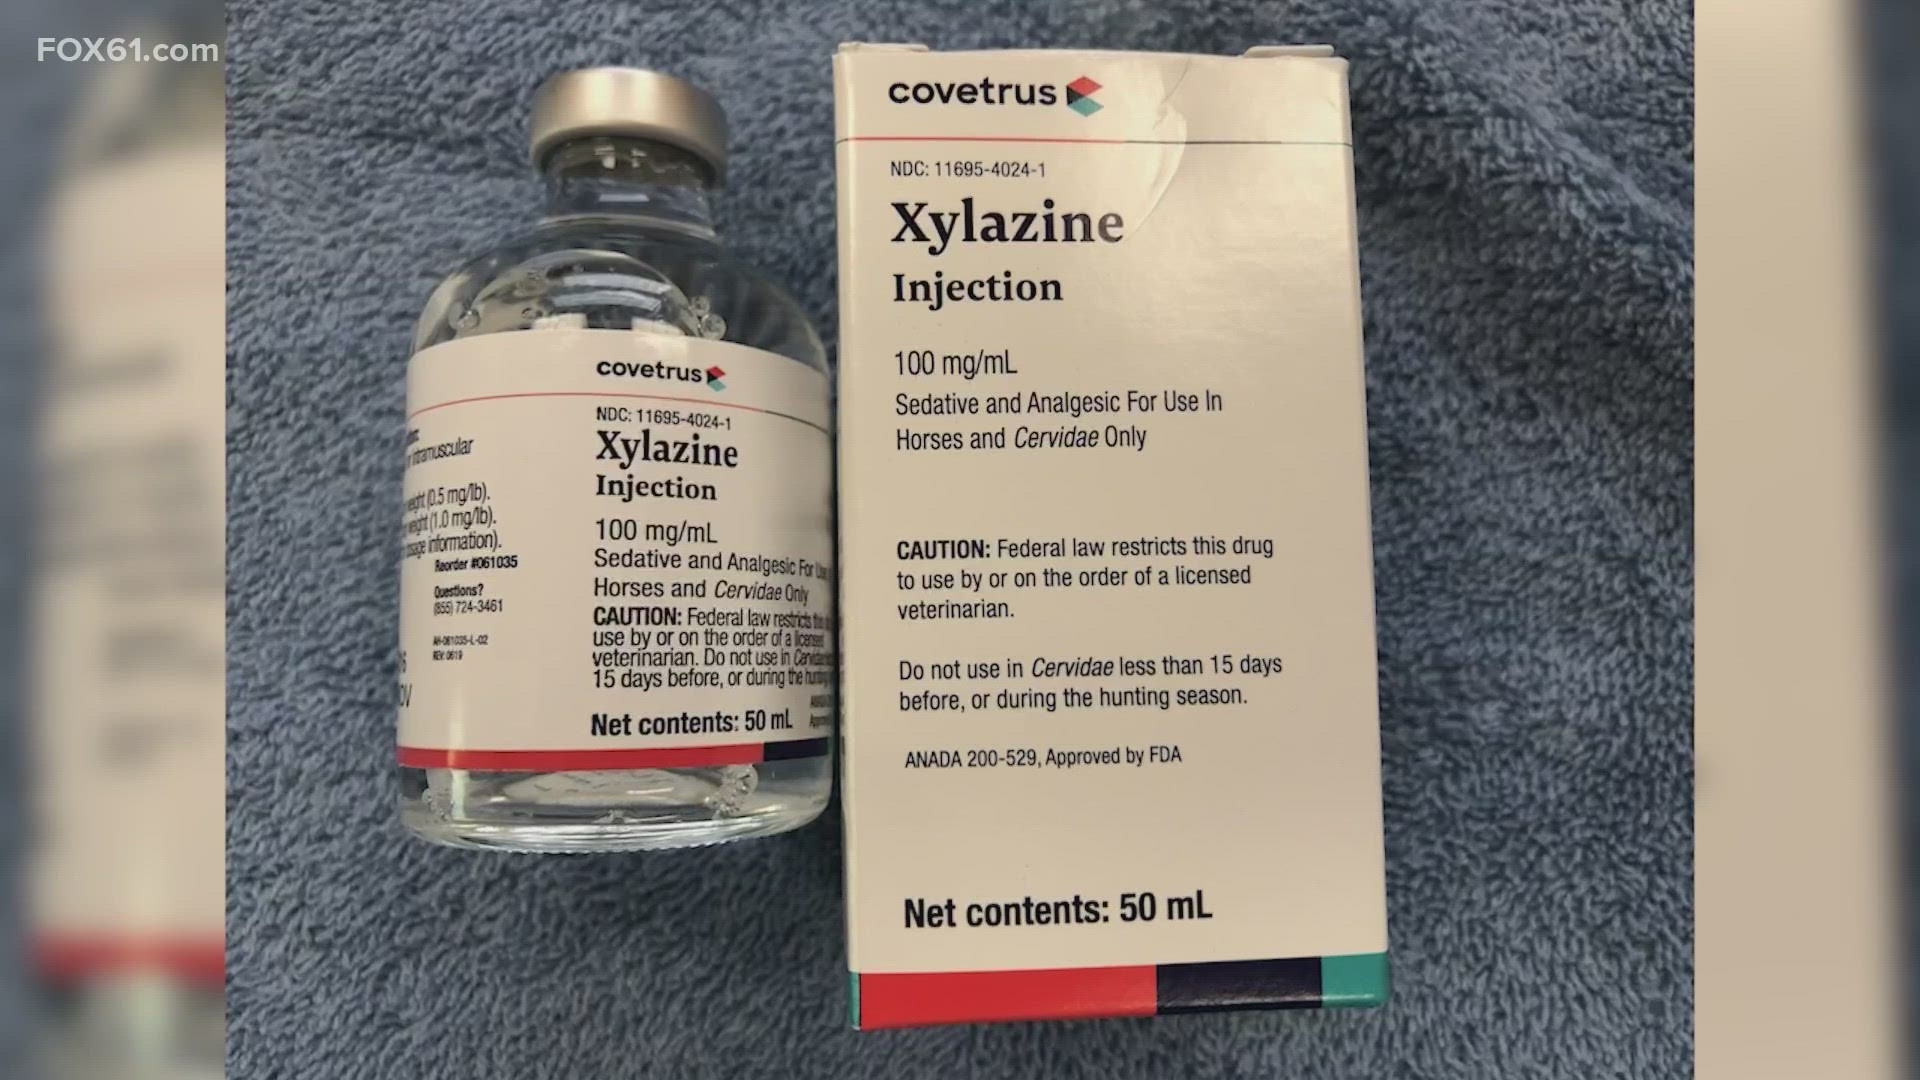 The CDC says xylazine's presence is growing throughout the country. In 2015, the tranquilizer was involved in less than 1% of overdoses. In 2020, that jumped to 7%.